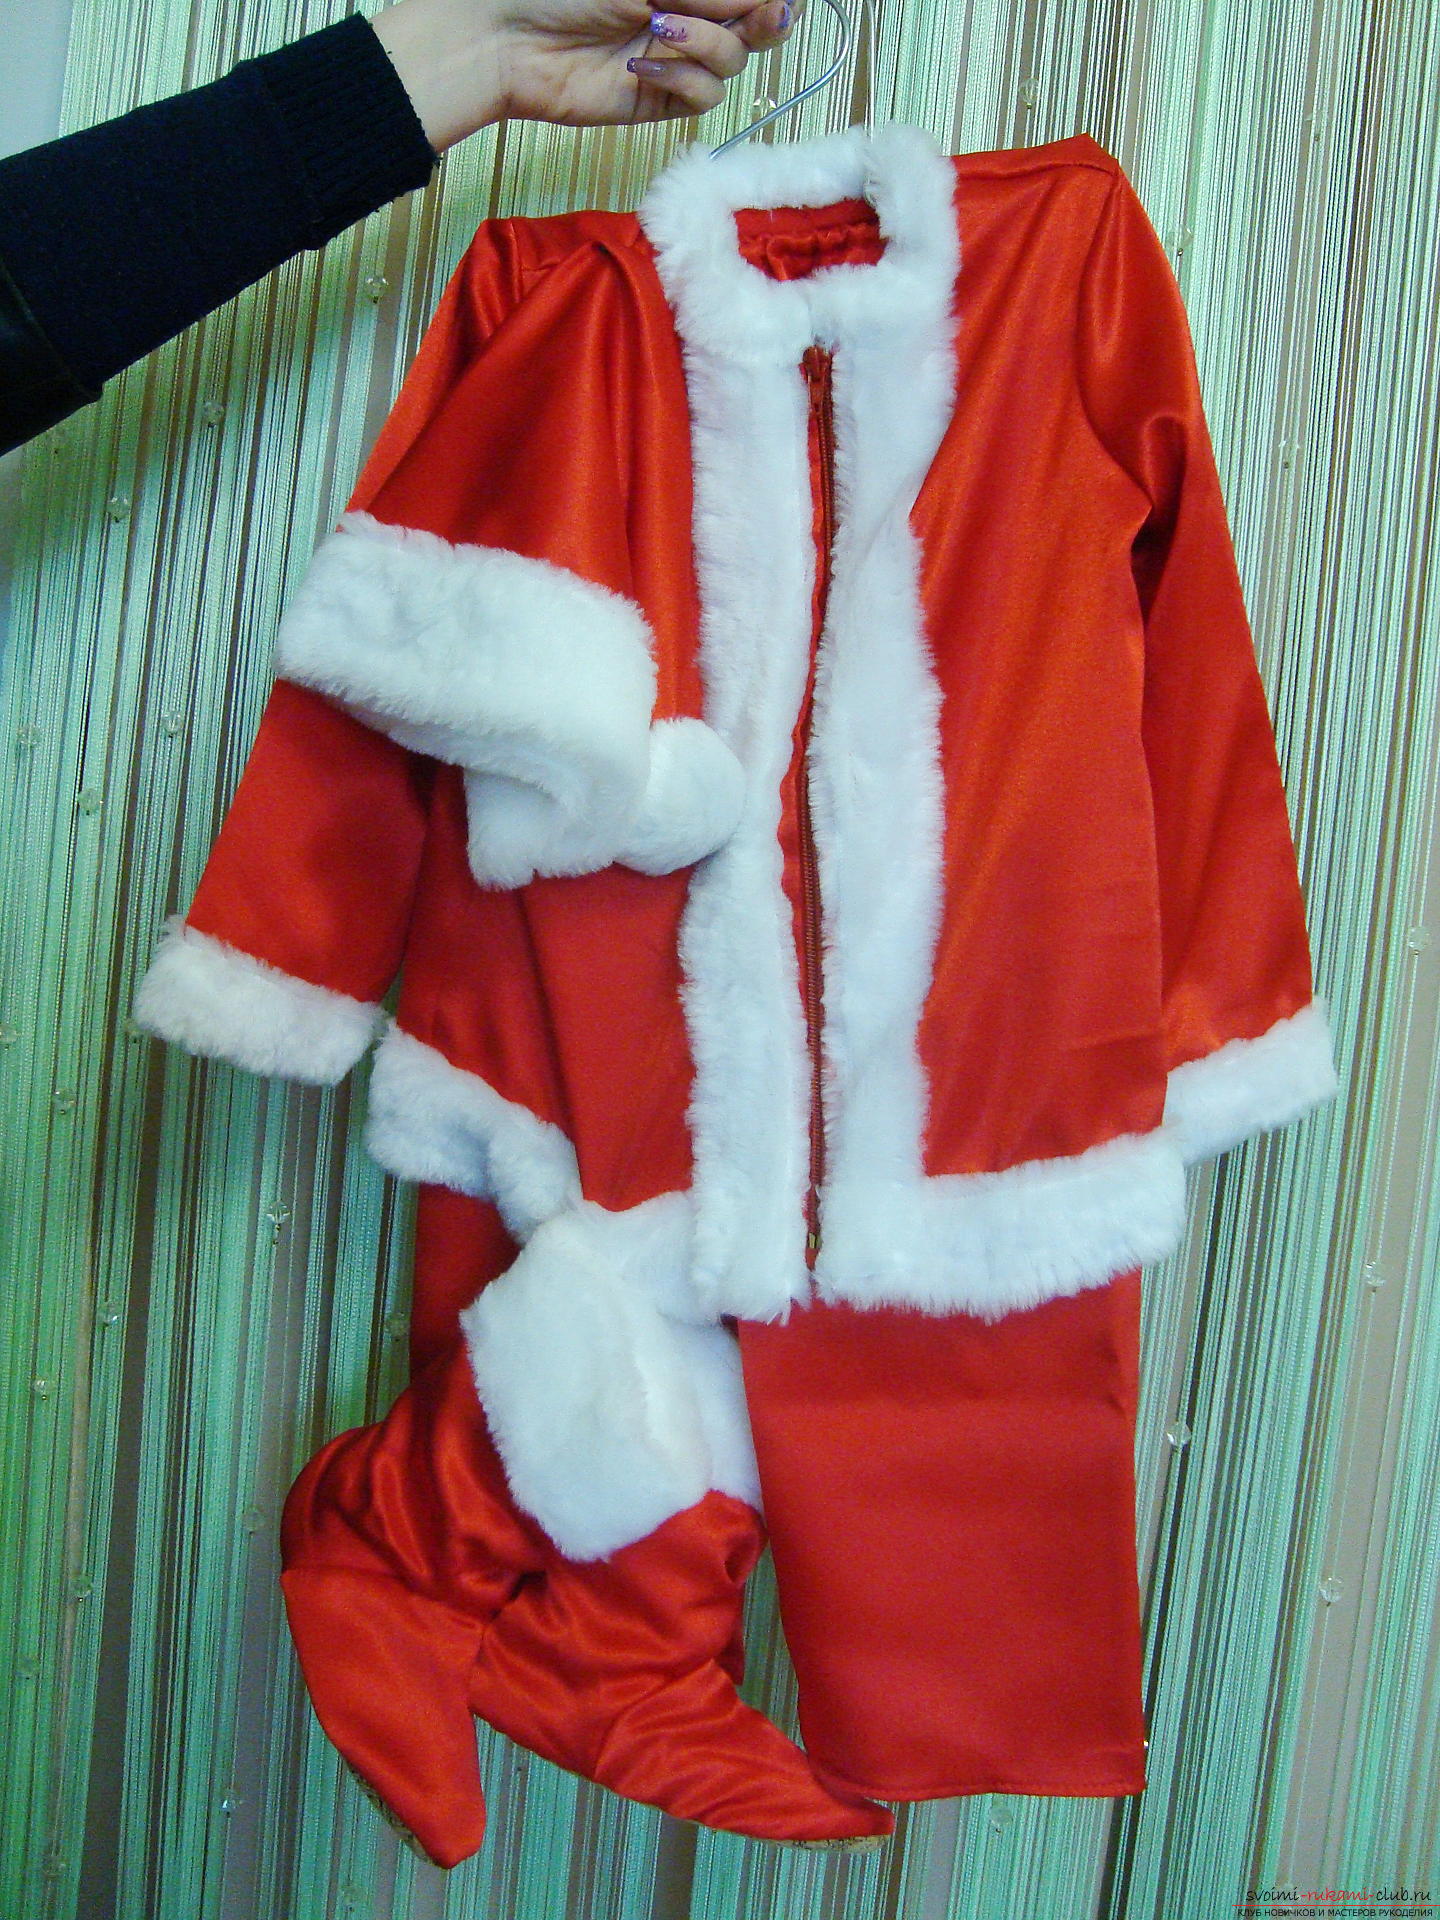 New Year's costume is not always convenient to buy, andTo sew a carnival costume for a boy can even a beginner skilled. Masterclass with photos and videos will help create a New Year's children's costume in the image of Santa Claus .. Photo # 1